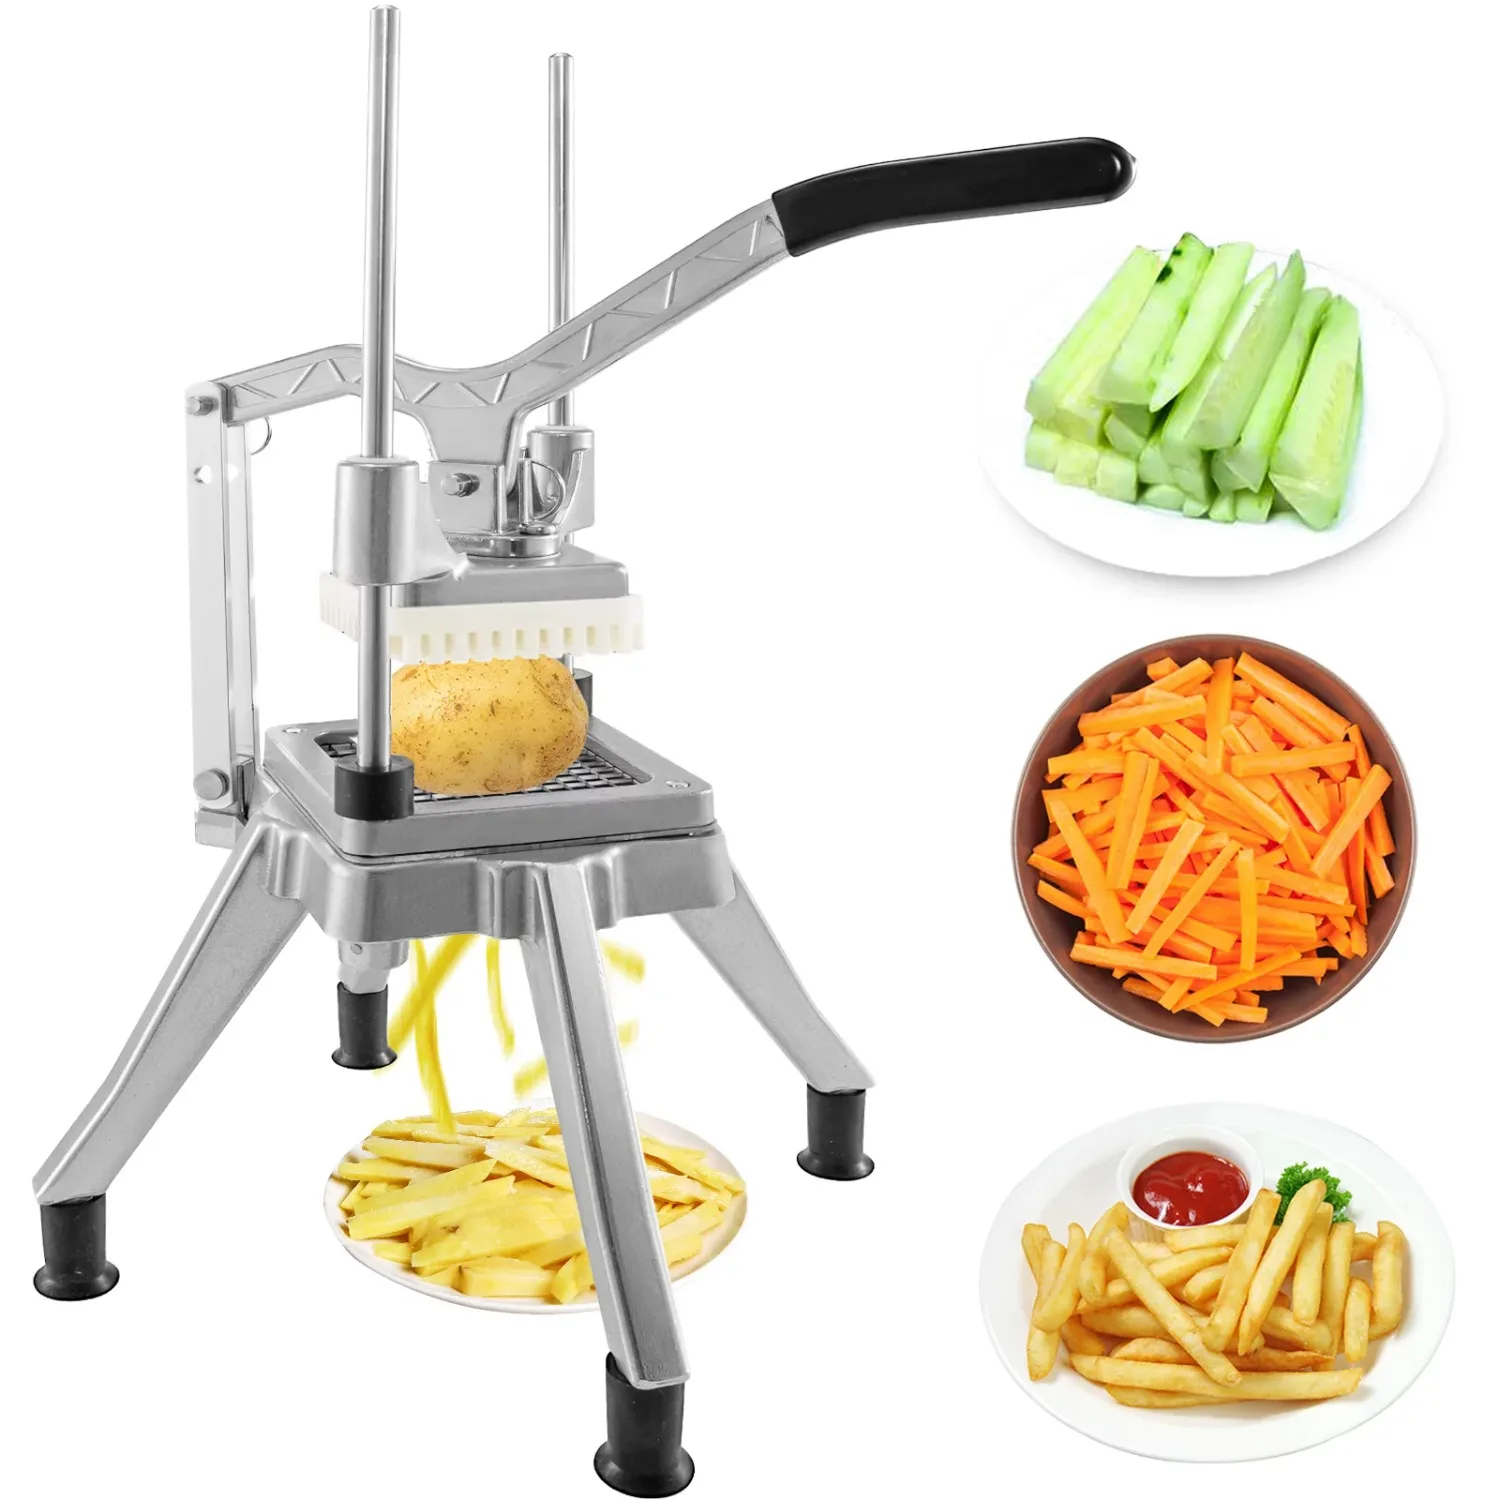 

Vegetable Fruit Chopper 1/4in Blade Heavy Duty Professional Food Dicer Kattex French Fry Cutter Onion Slicer Stainless Steel